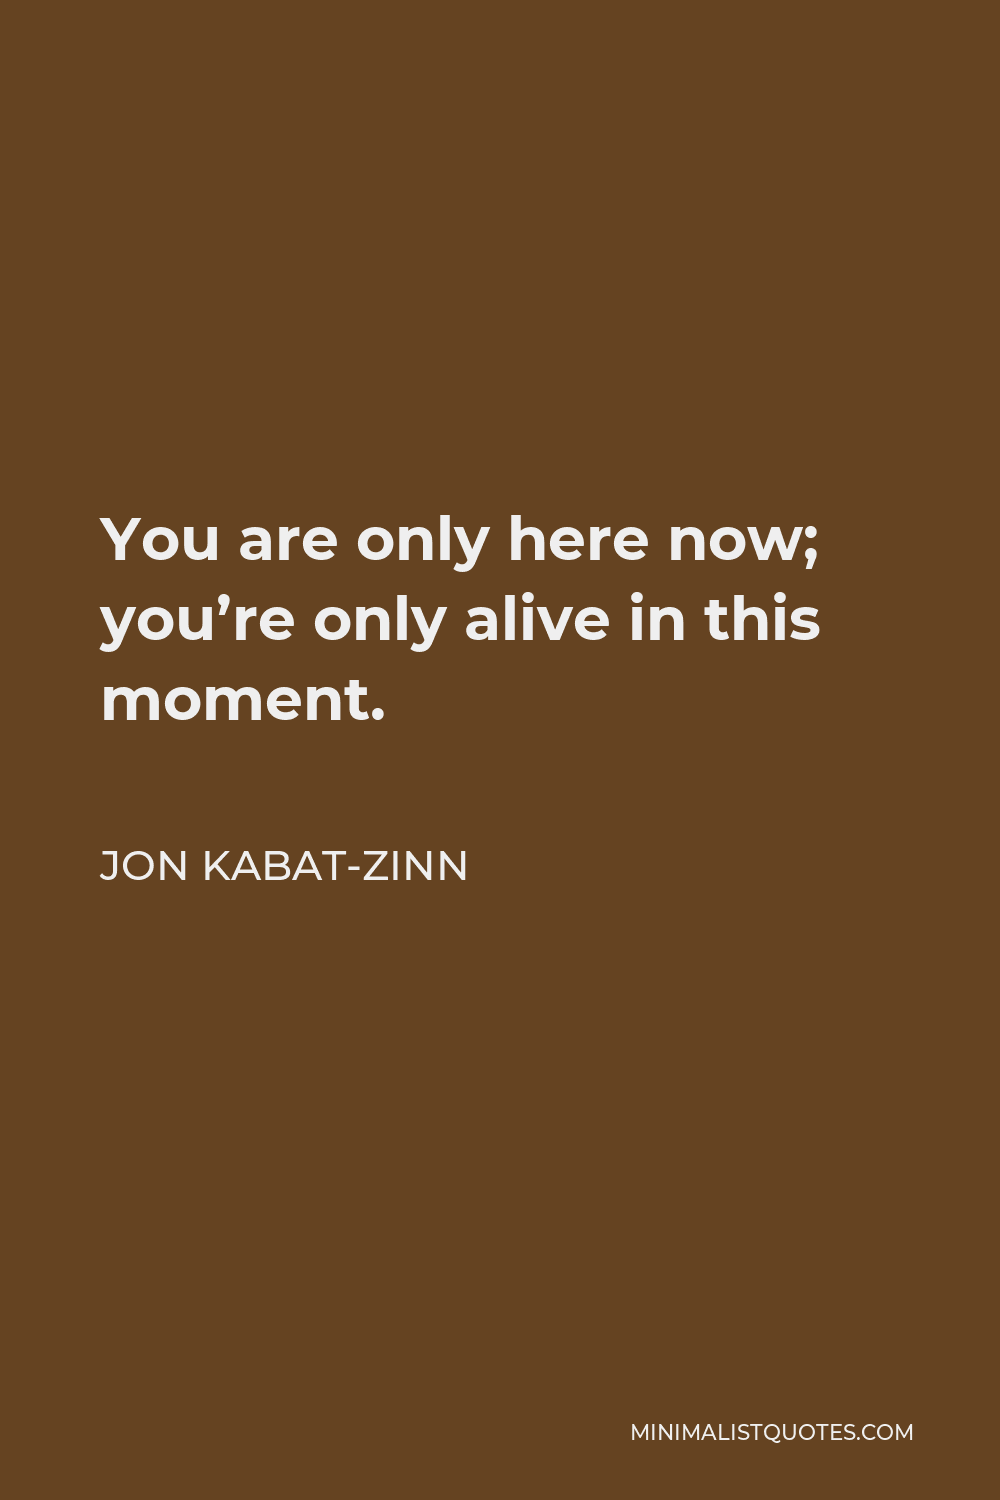 Jon Kabat-Zinn Quote - You are only here now; you’re only alive in this moment.